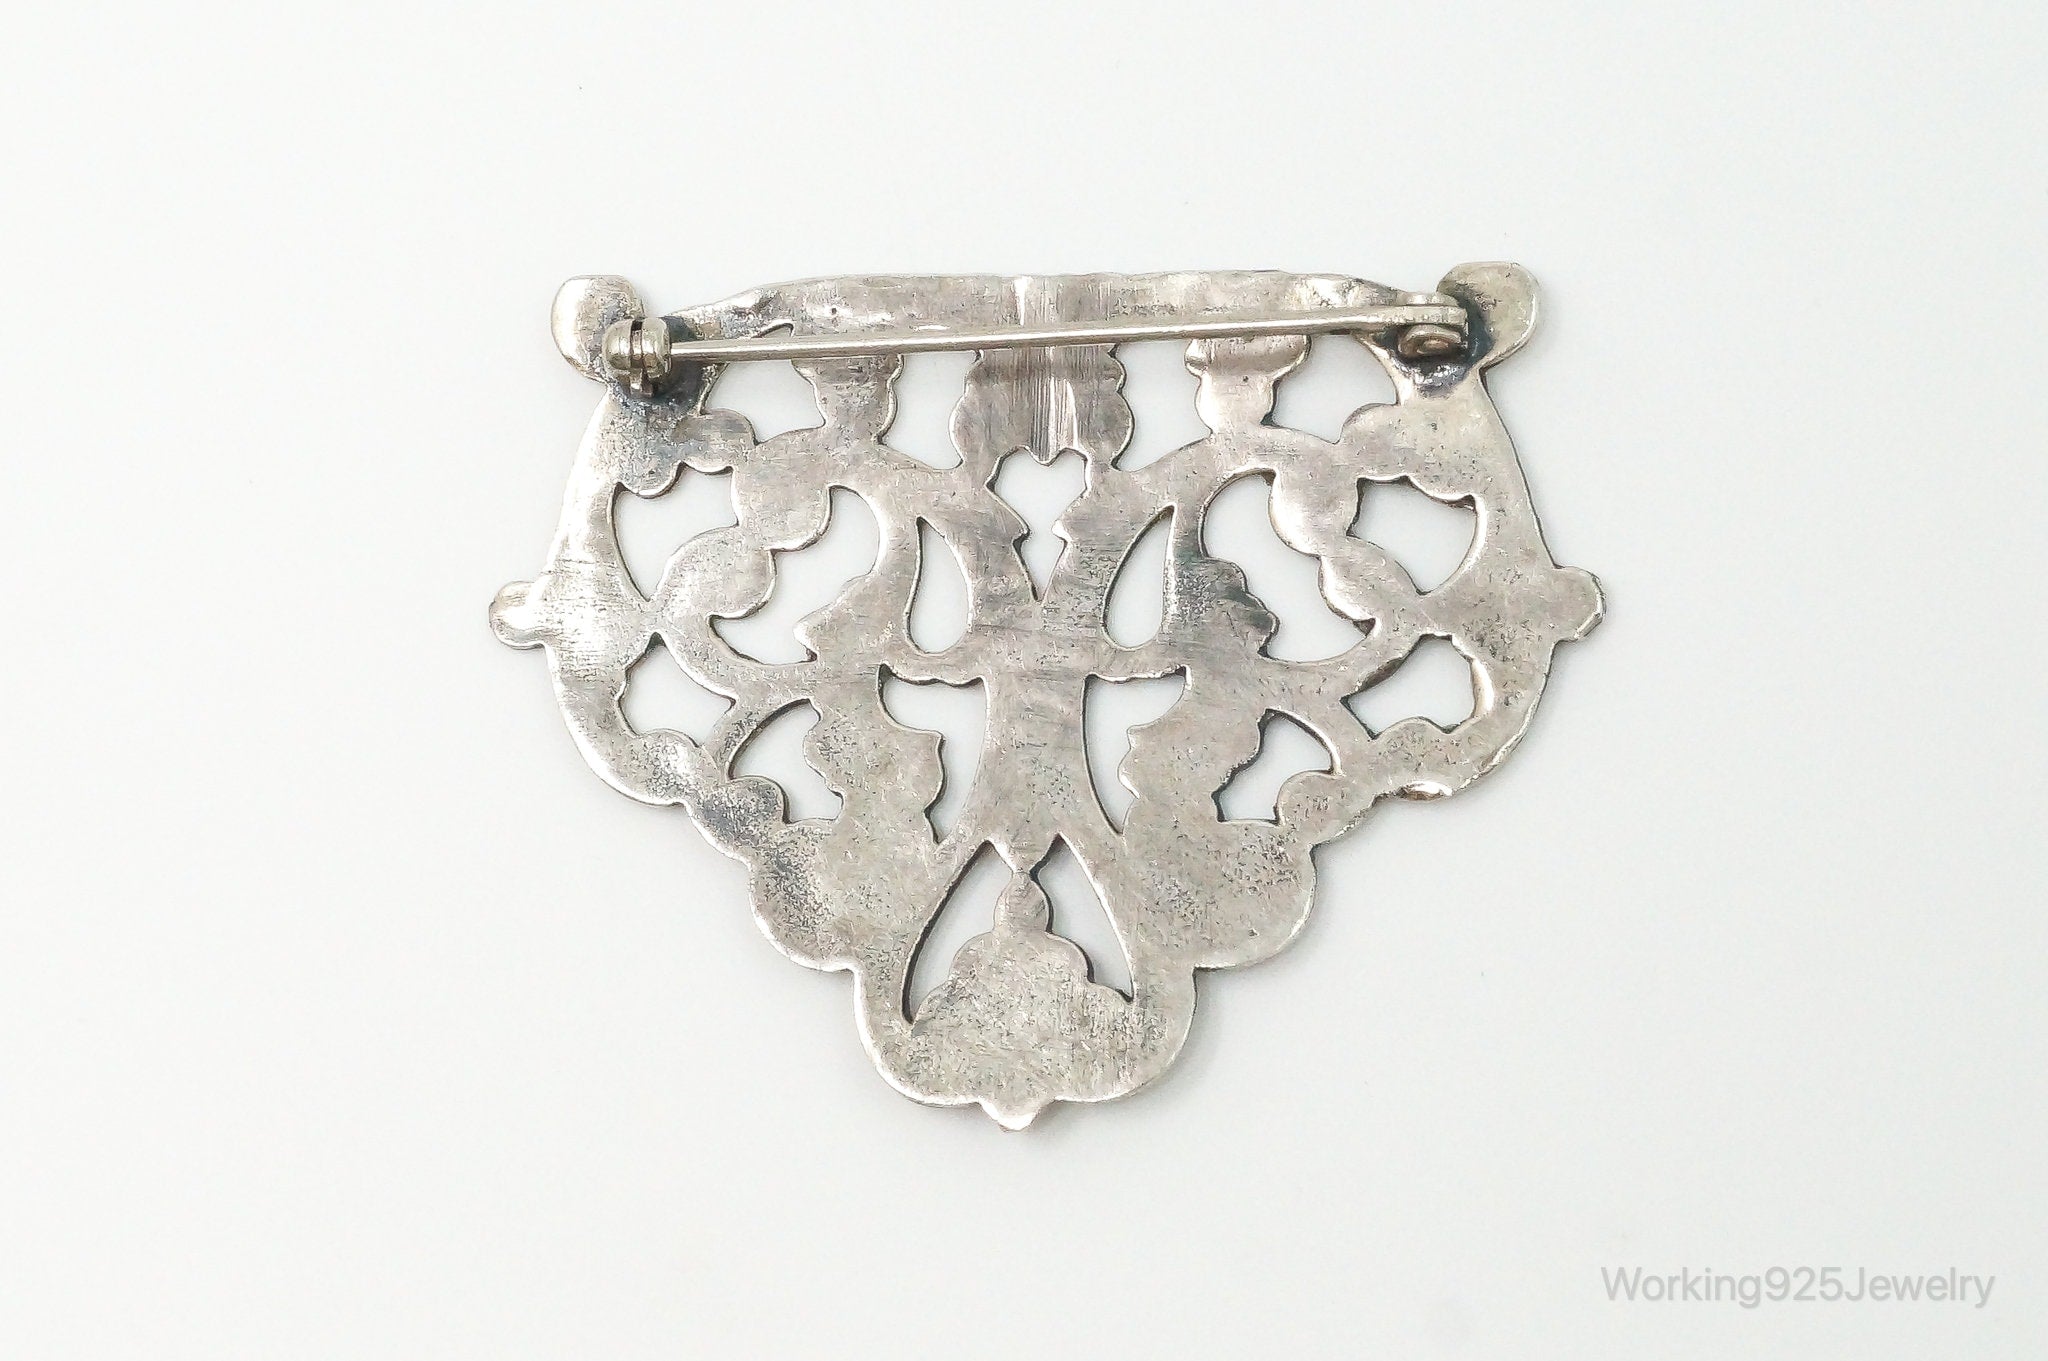 Large Antique Floral Motif Sterling Silver Brooch Pin